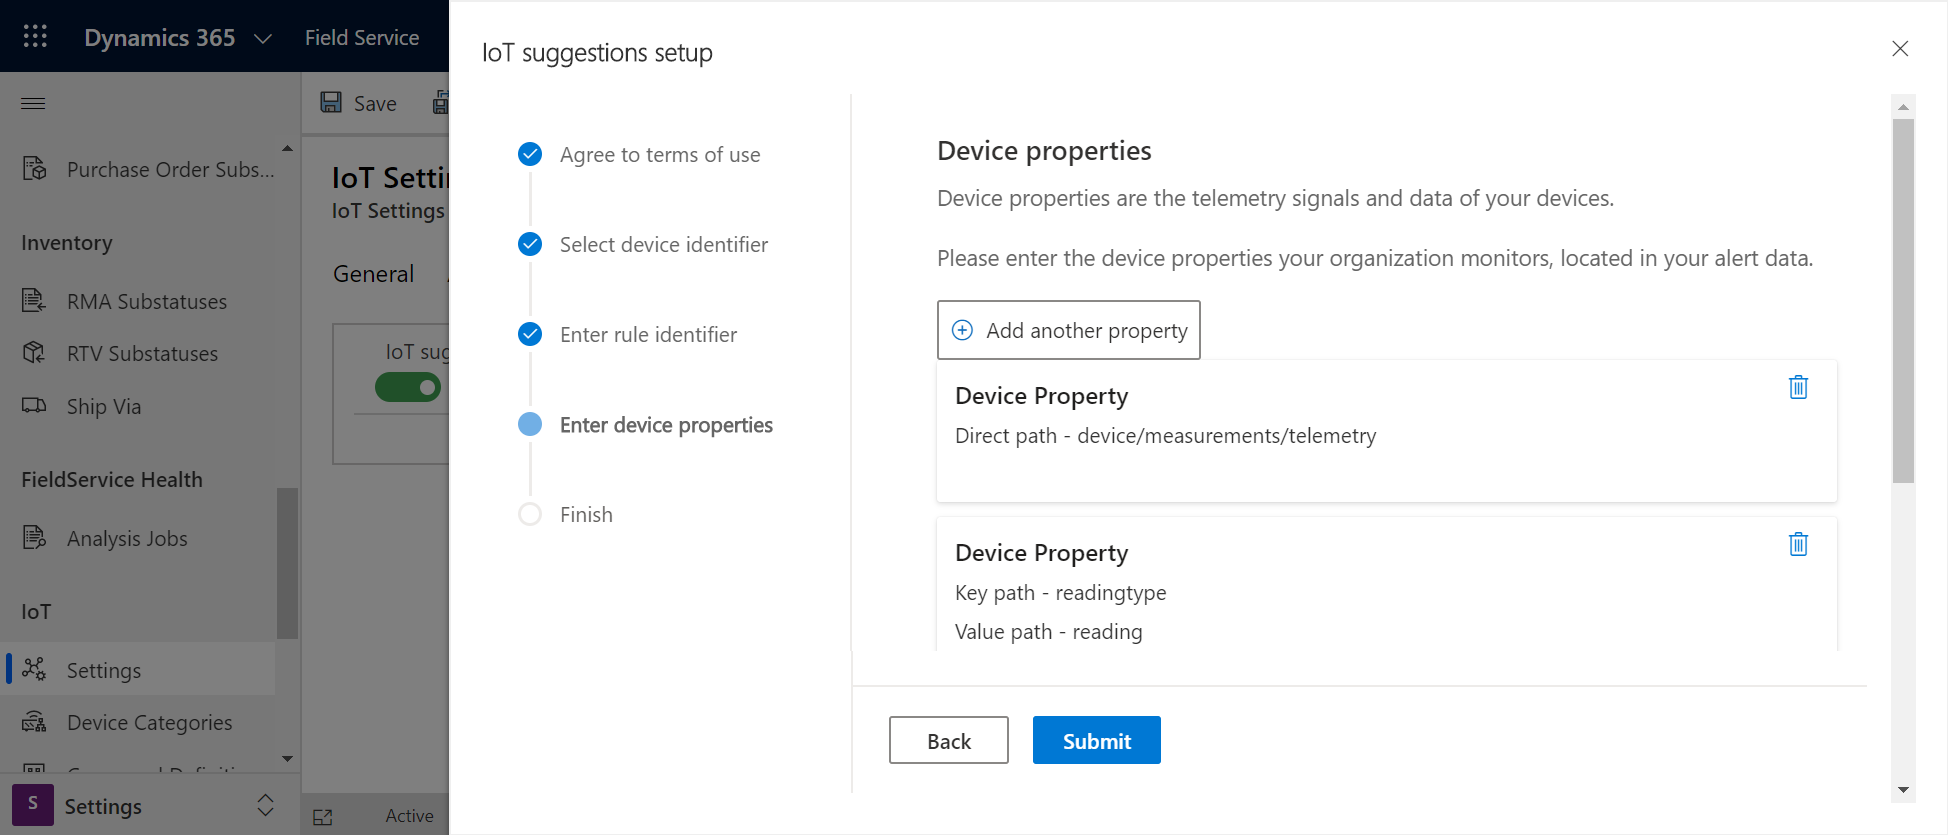 Screenshot of the IoT suggestions setup screen, showing the device properties section.